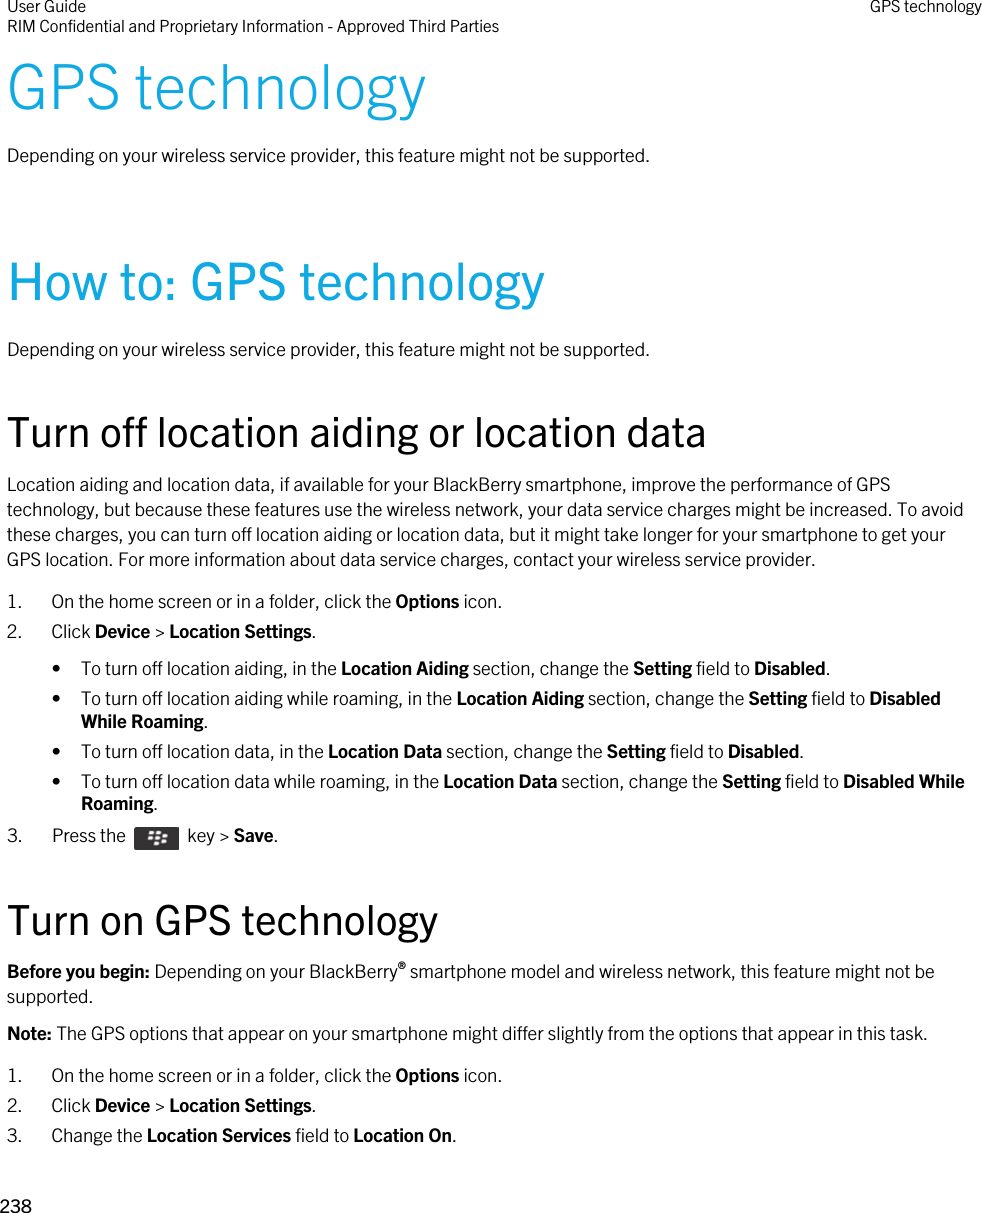 GPS technologyDepending on your wireless service provider, this feature might not be supported. How to: GPS technologyDepending on your wireless service provider, this feature might not be supported. Turn off location aiding or location dataLocation aiding and location data, if available for your BlackBerry smartphone, improve the performance of GPS technology, but because these features use the wireless network, your data service charges might be increased. To avoid these charges, you can turn off location aiding or location data, but it might take longer for your smartphone to get your GPS location. For more information about data service charges, contact your wireless service provider.1. On the home screen or in a folder, click the Options icon.2. Click Device &gt; Location Settings.• To turn off location aiding, in the Location Aiding section, change the Setting field to Disabled.• To turn off location aiding while roaming, in the Location Aiding section, change the Setting field to Disabled While Roaming.• To turn off location data, in the Location Data section, change the Setting field to Disabled.• To turn off location data while roaming, in the Location Data section, change the Setting field to Disabled While Roaming.3.  Press the    key &gt; Save. Turn on GPS technologyBefore you begin: Depending on your BlackBerry® smartphone model and wireless network, this feature might not be supported. Note: The GPS options that appear on your smartphone might differ slightly from the options that appear in this task.1. On the home screen or in a folder, click the Options icon.2. Click Device &gt; Location Settings.3. Change the Location Services field to Location On.User GuideRIM Confidential and Proprietary Information - Approved Third Parties GPS technology238 